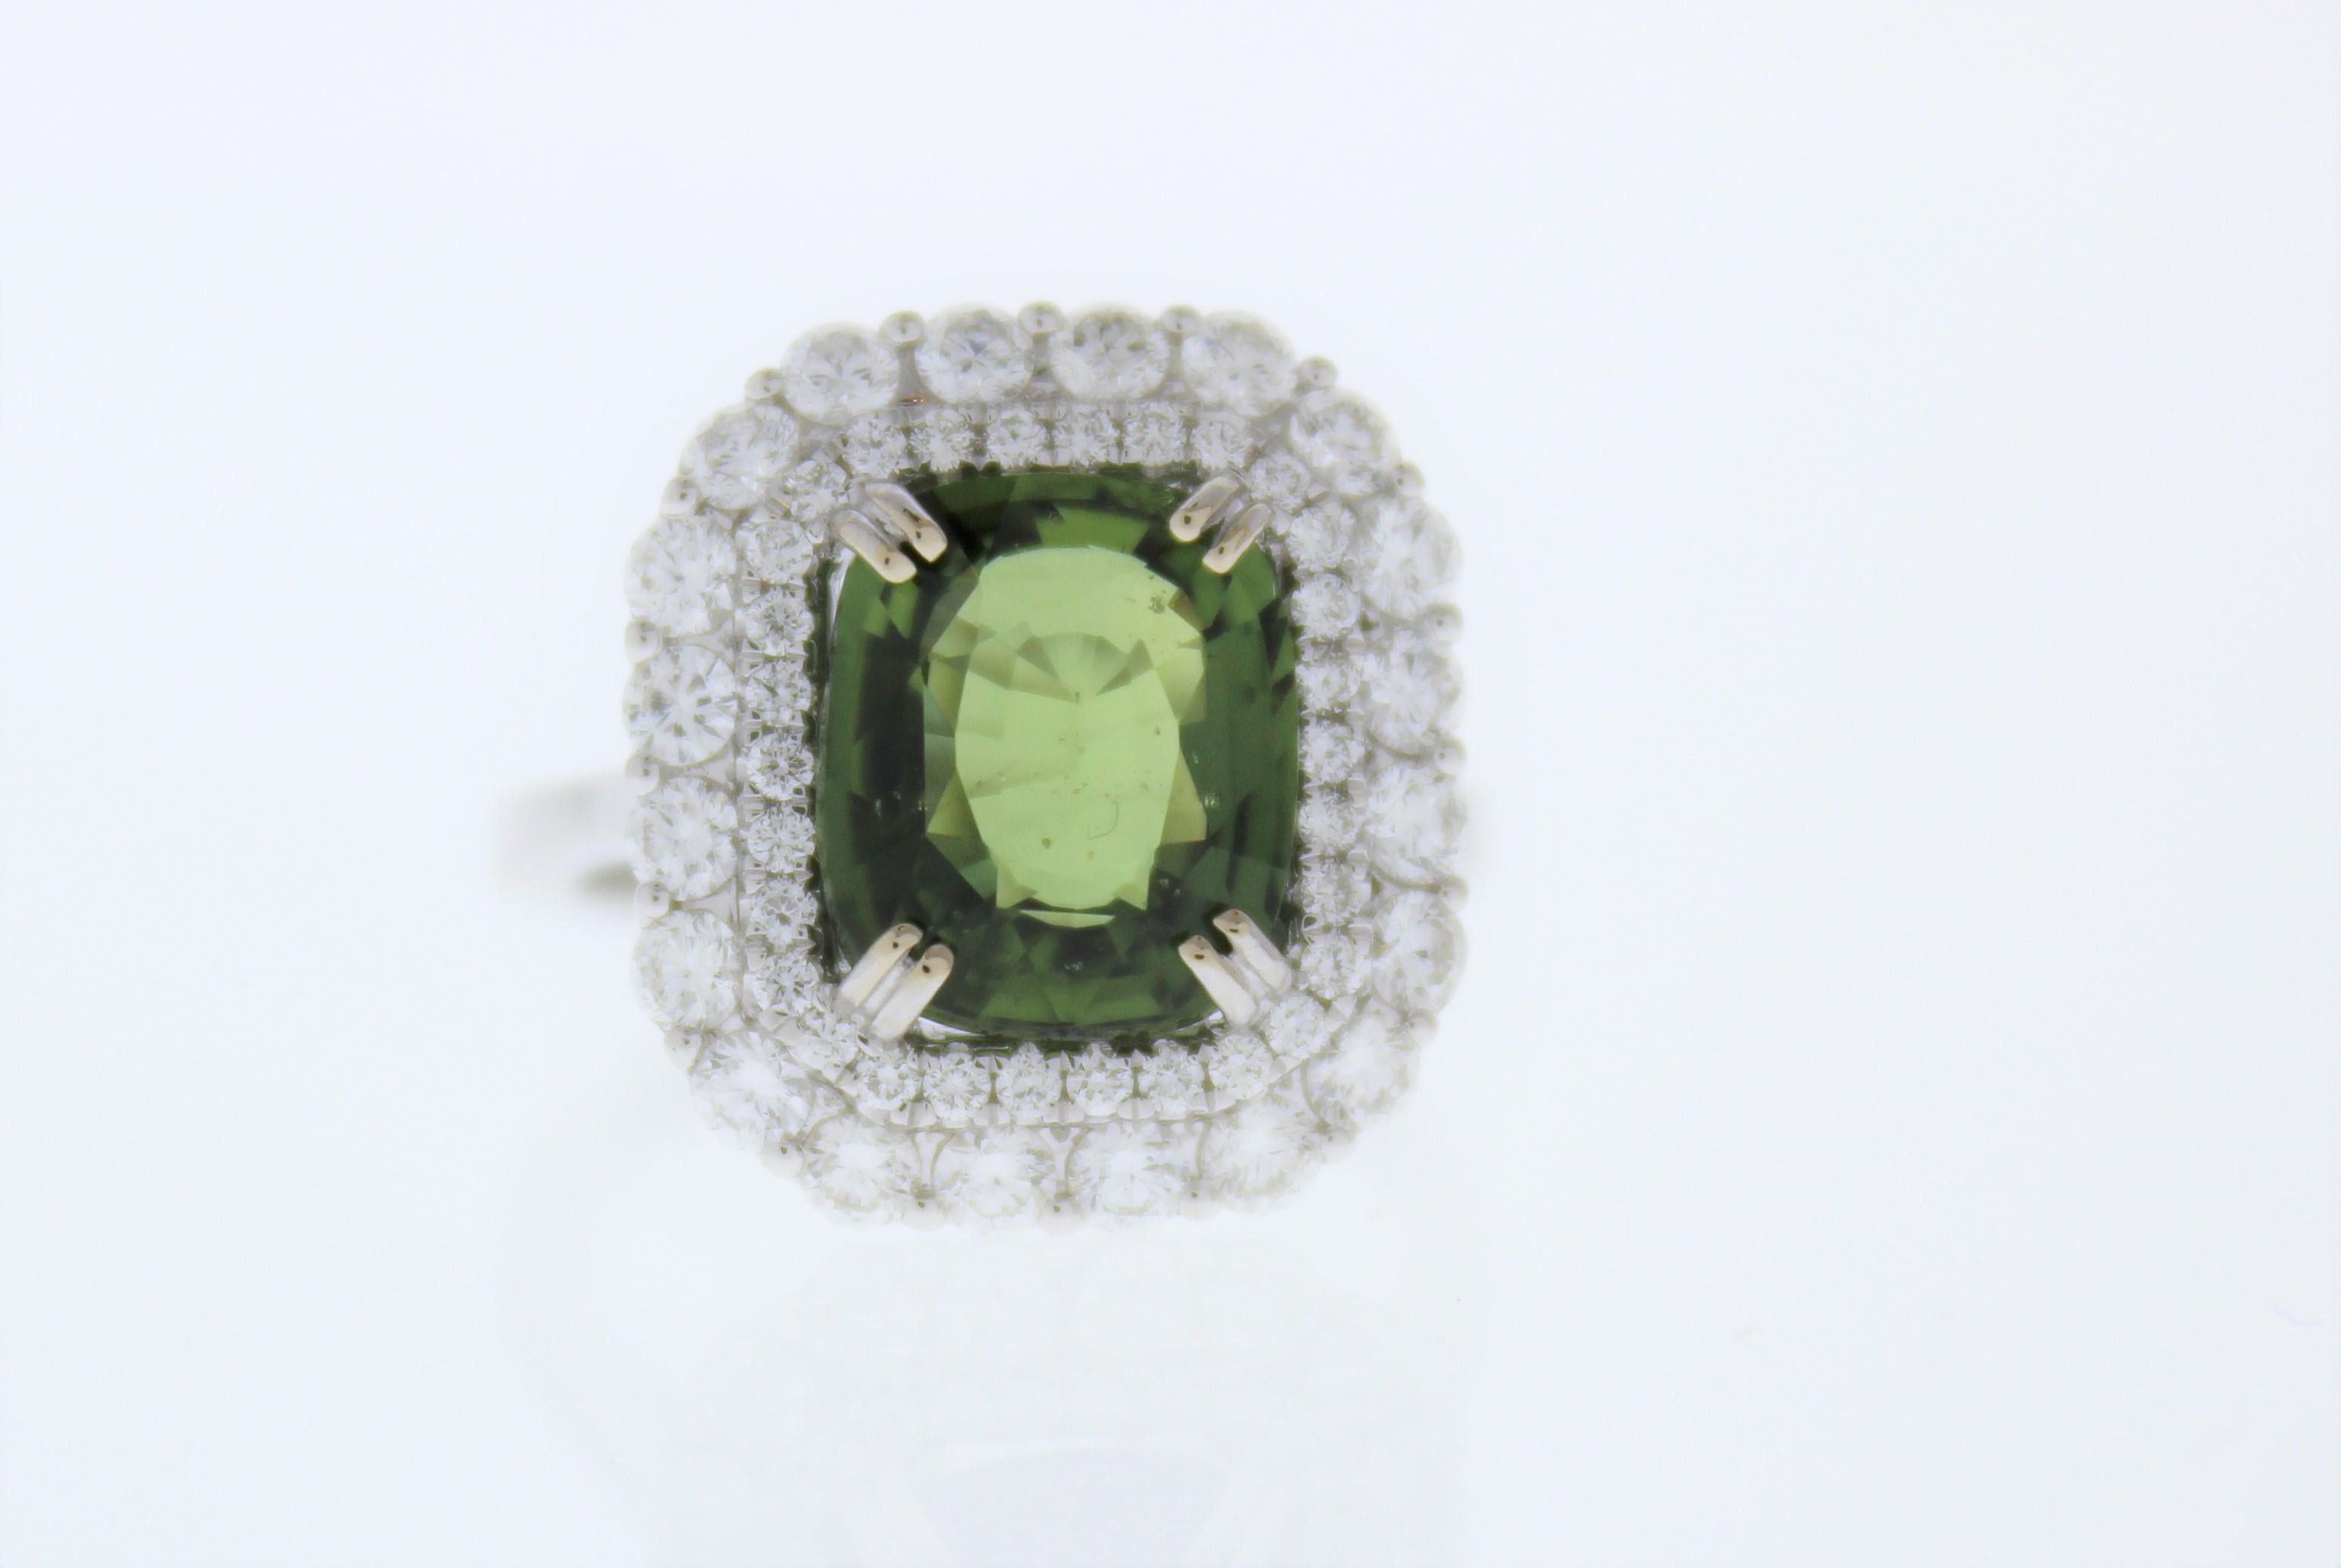 This unique halo cocktail ring features a cushion cut green sapphire weighing 5.13 carat. This green sapphire takes center stage in a rich gold double prong setting. Its gem source is Sri Lanka; its transparency and luster are excellent. A total of